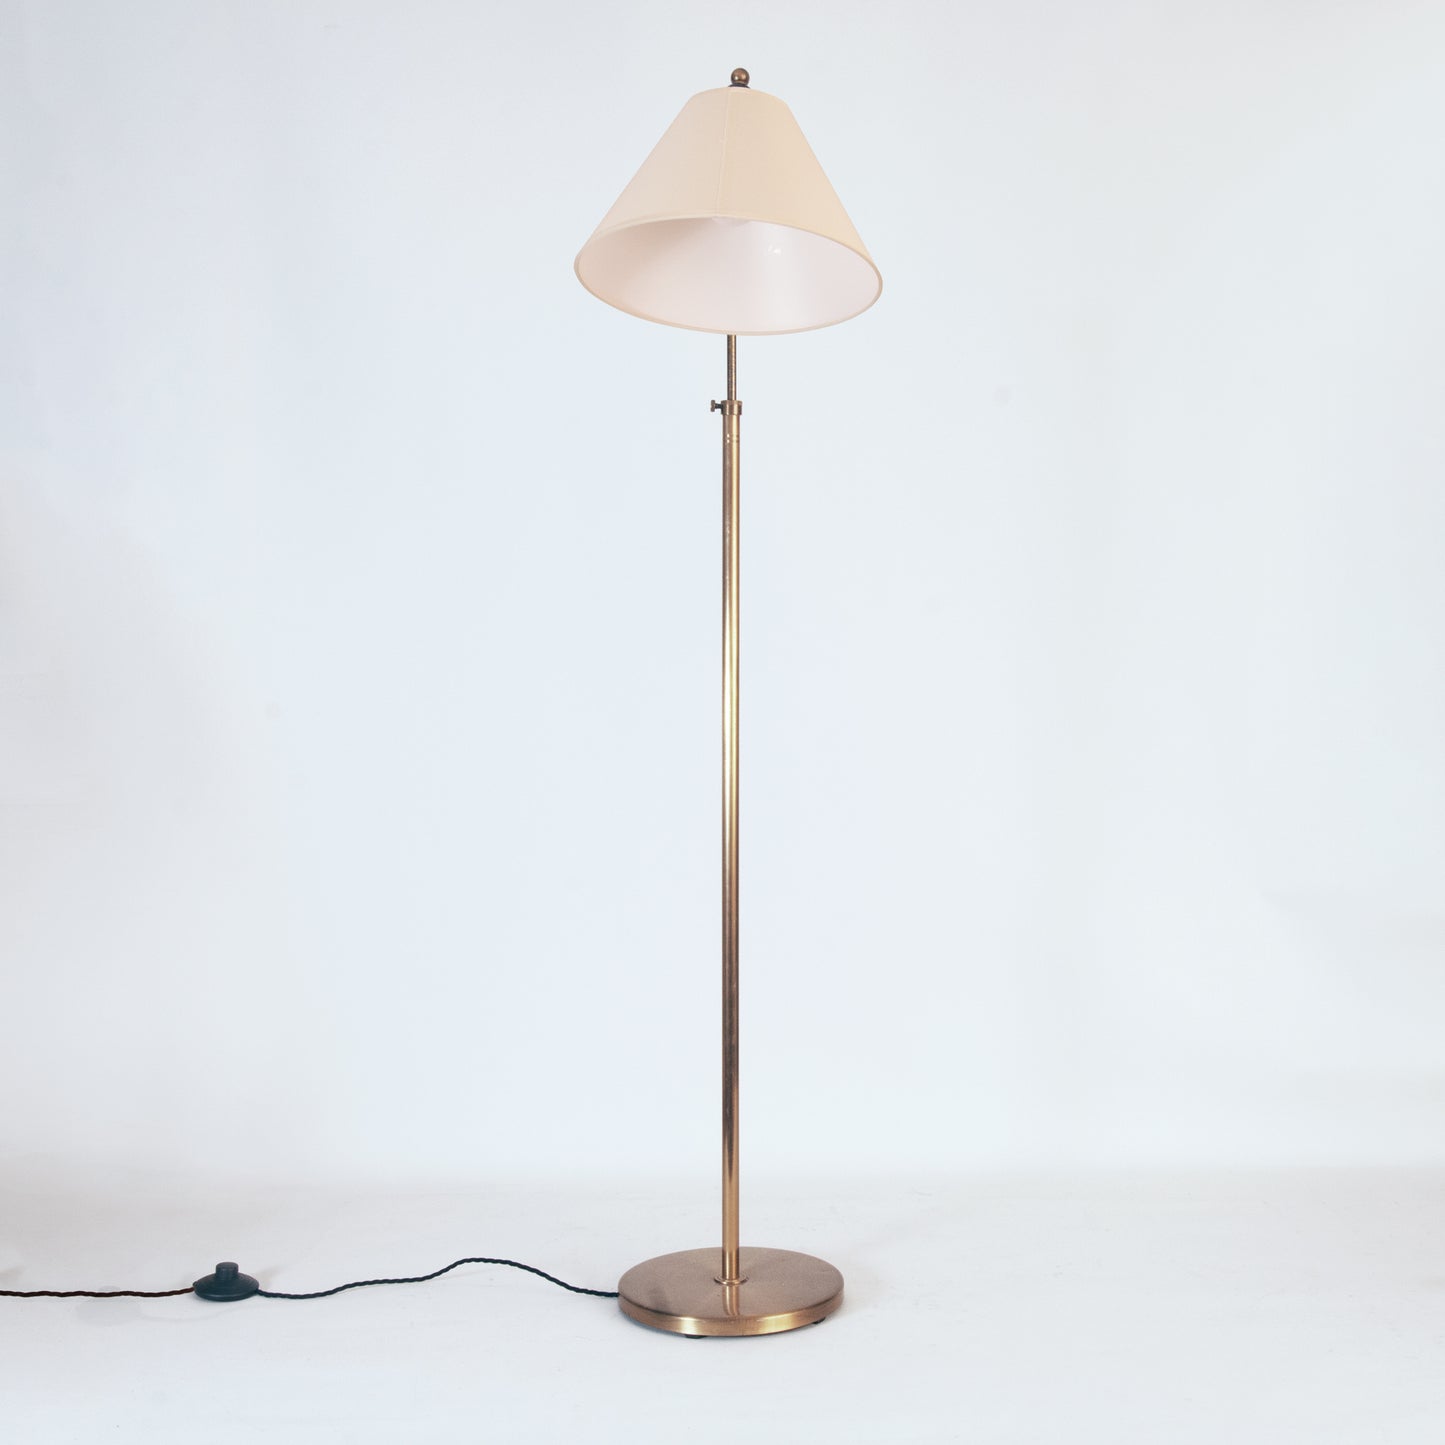 Telescopic floor lamp with curved neck